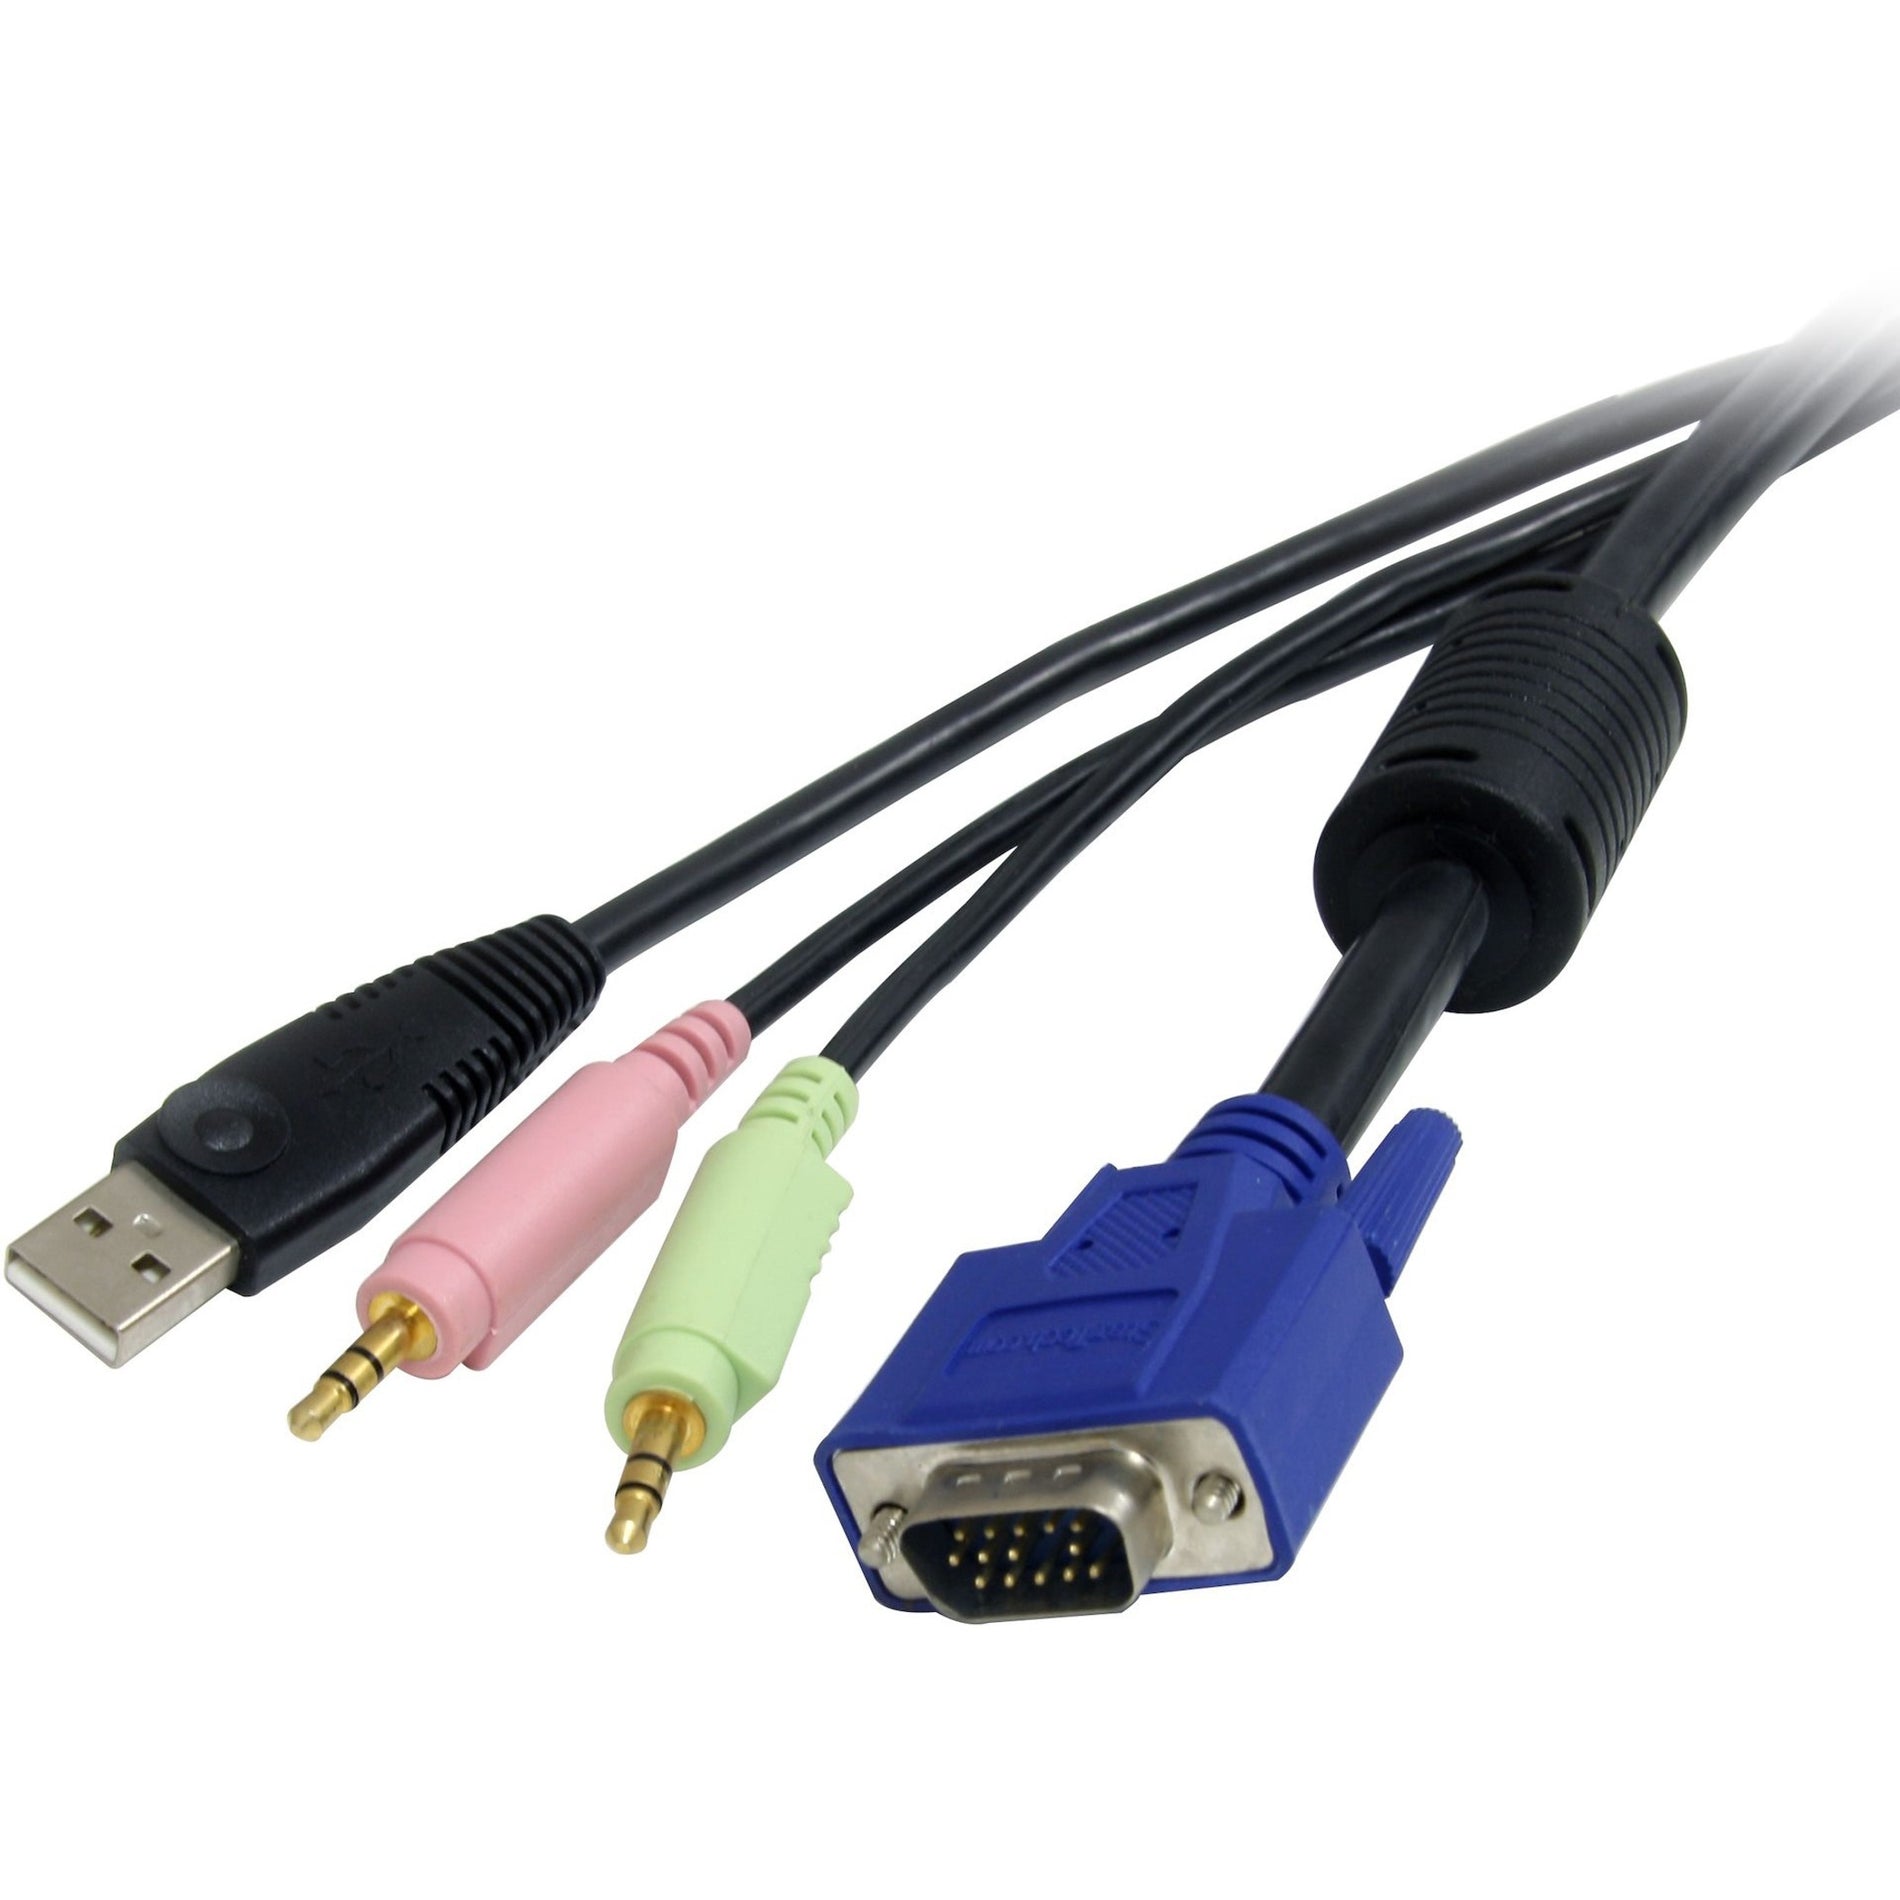 StarTech.com USBVGA4N1A6 6 ft 4-in-1 USB VGA KVM Switch Cable with Audio, Convenient and Versatile Solution for KVM Switching